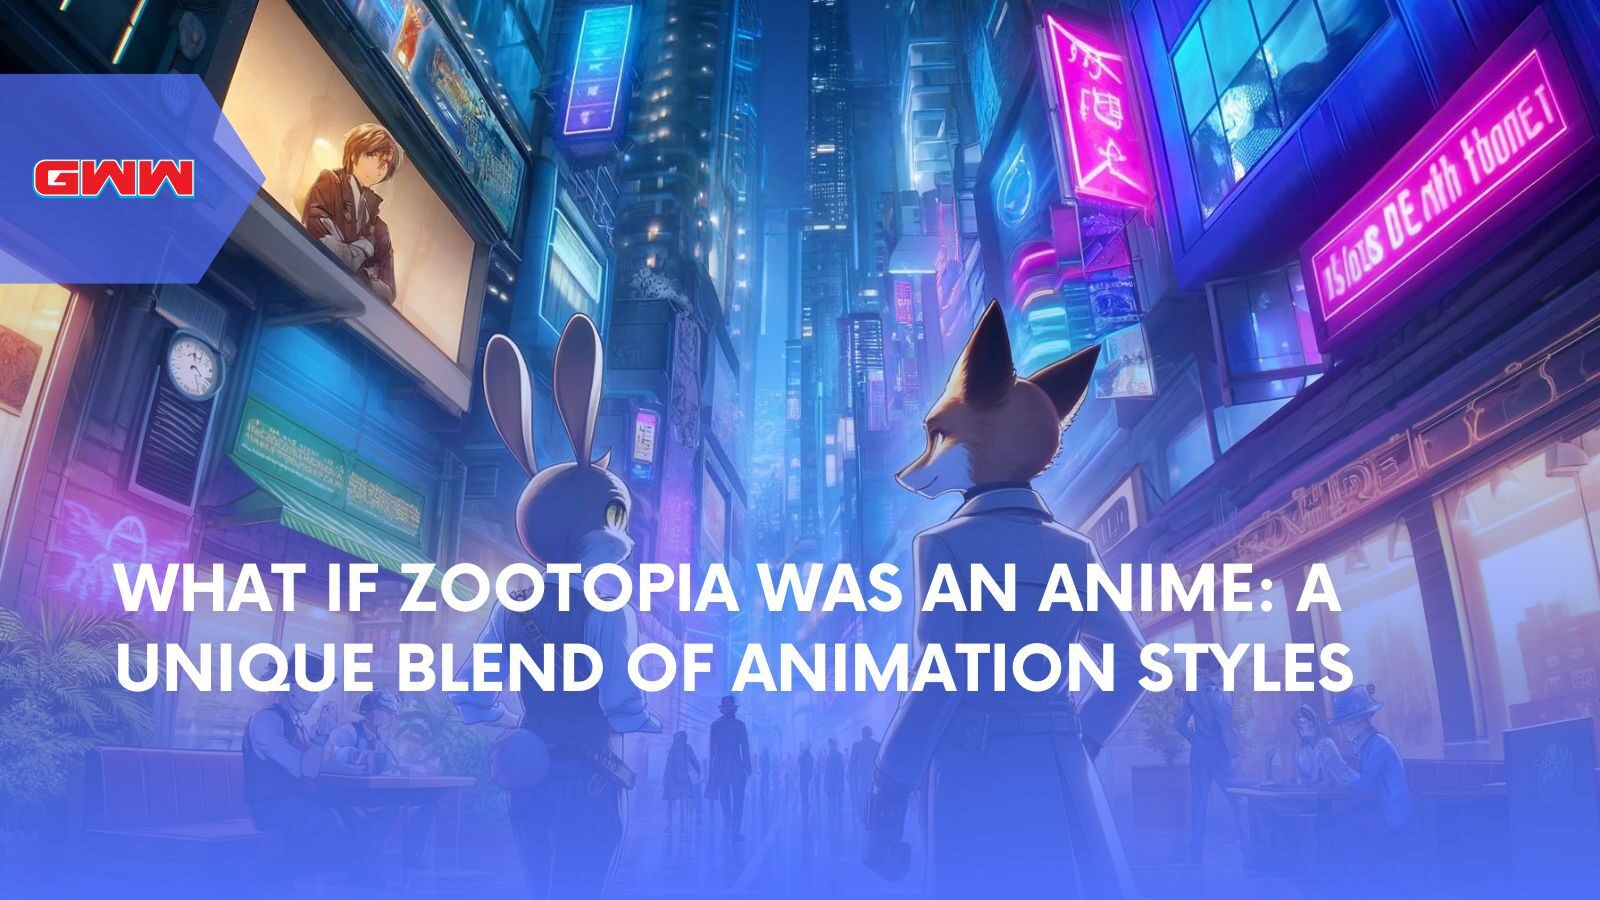 What If Zootopia Was an Anime: A Unique Blend of Animation Styles